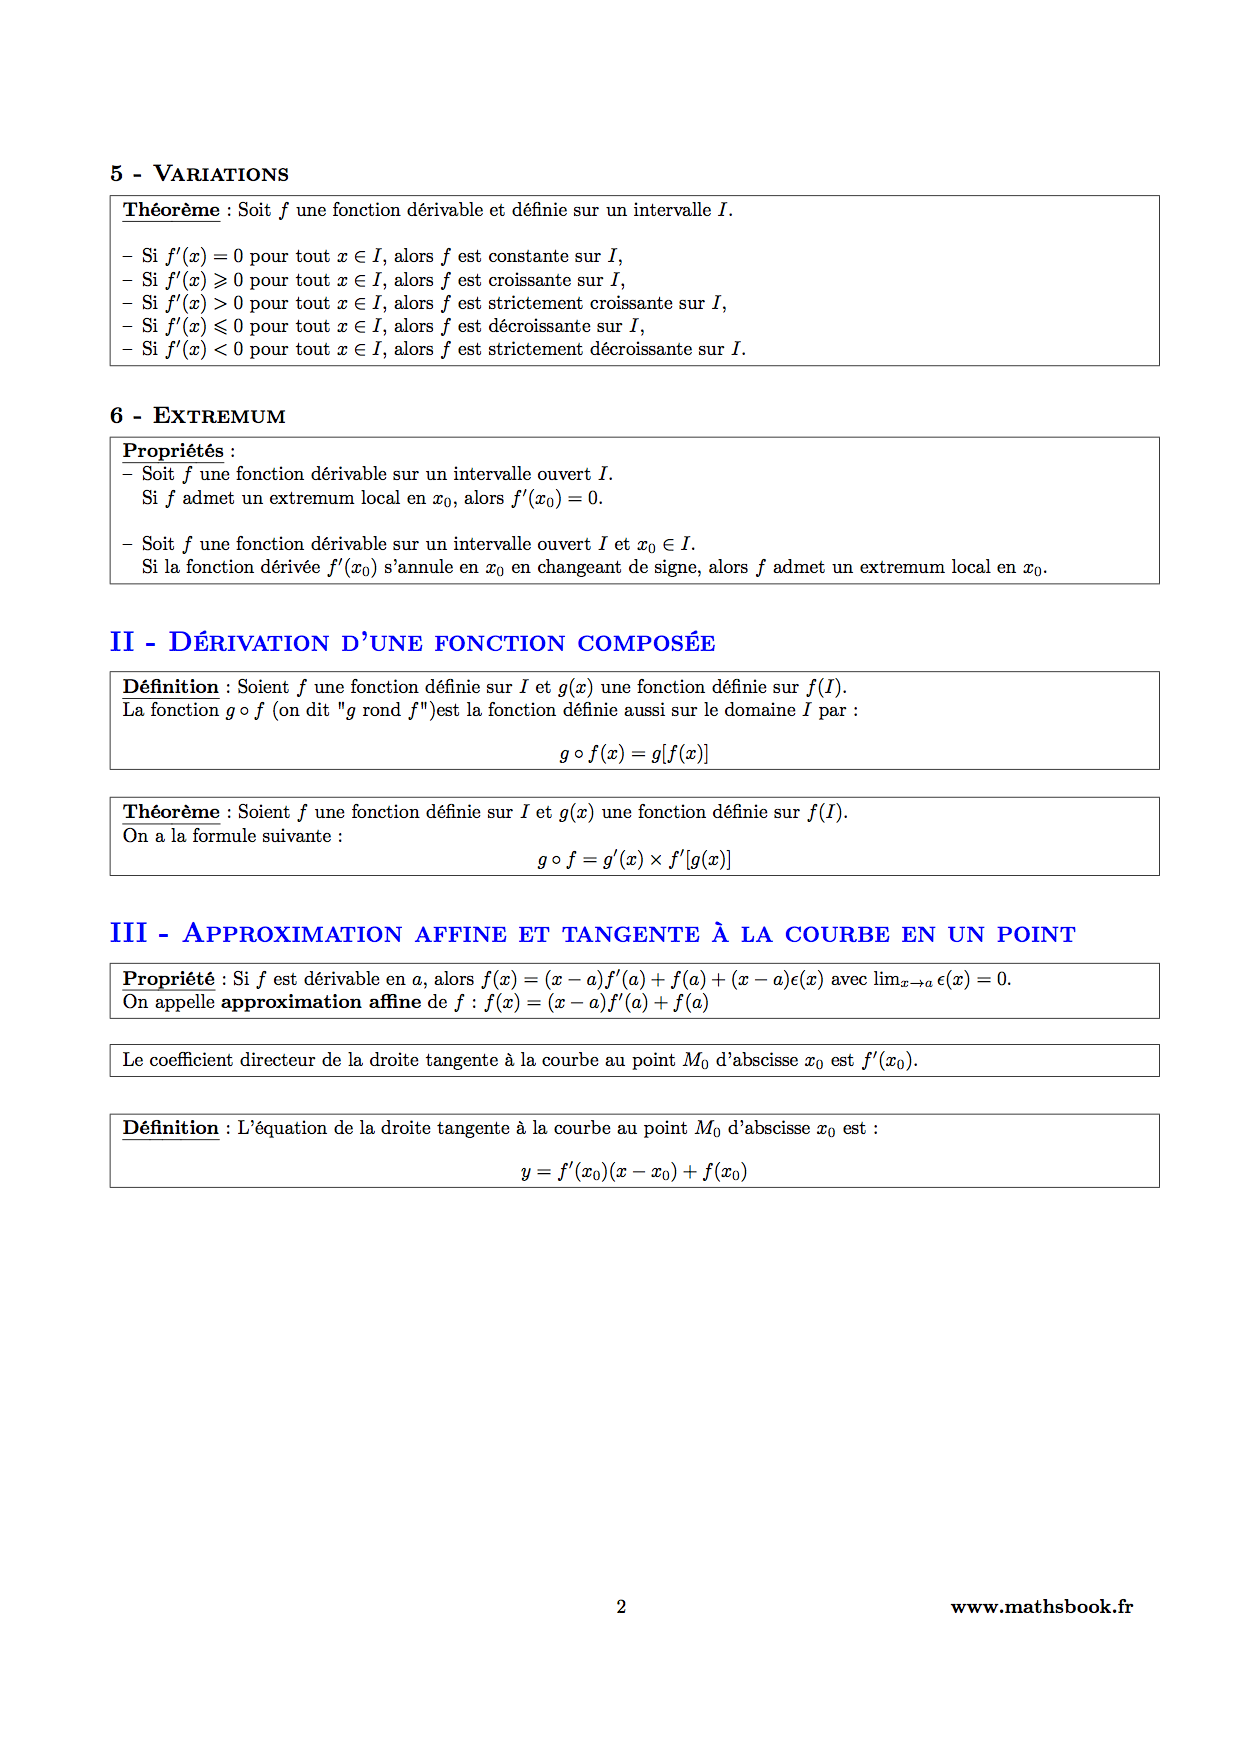 variation derivation fonctino composee et tangente